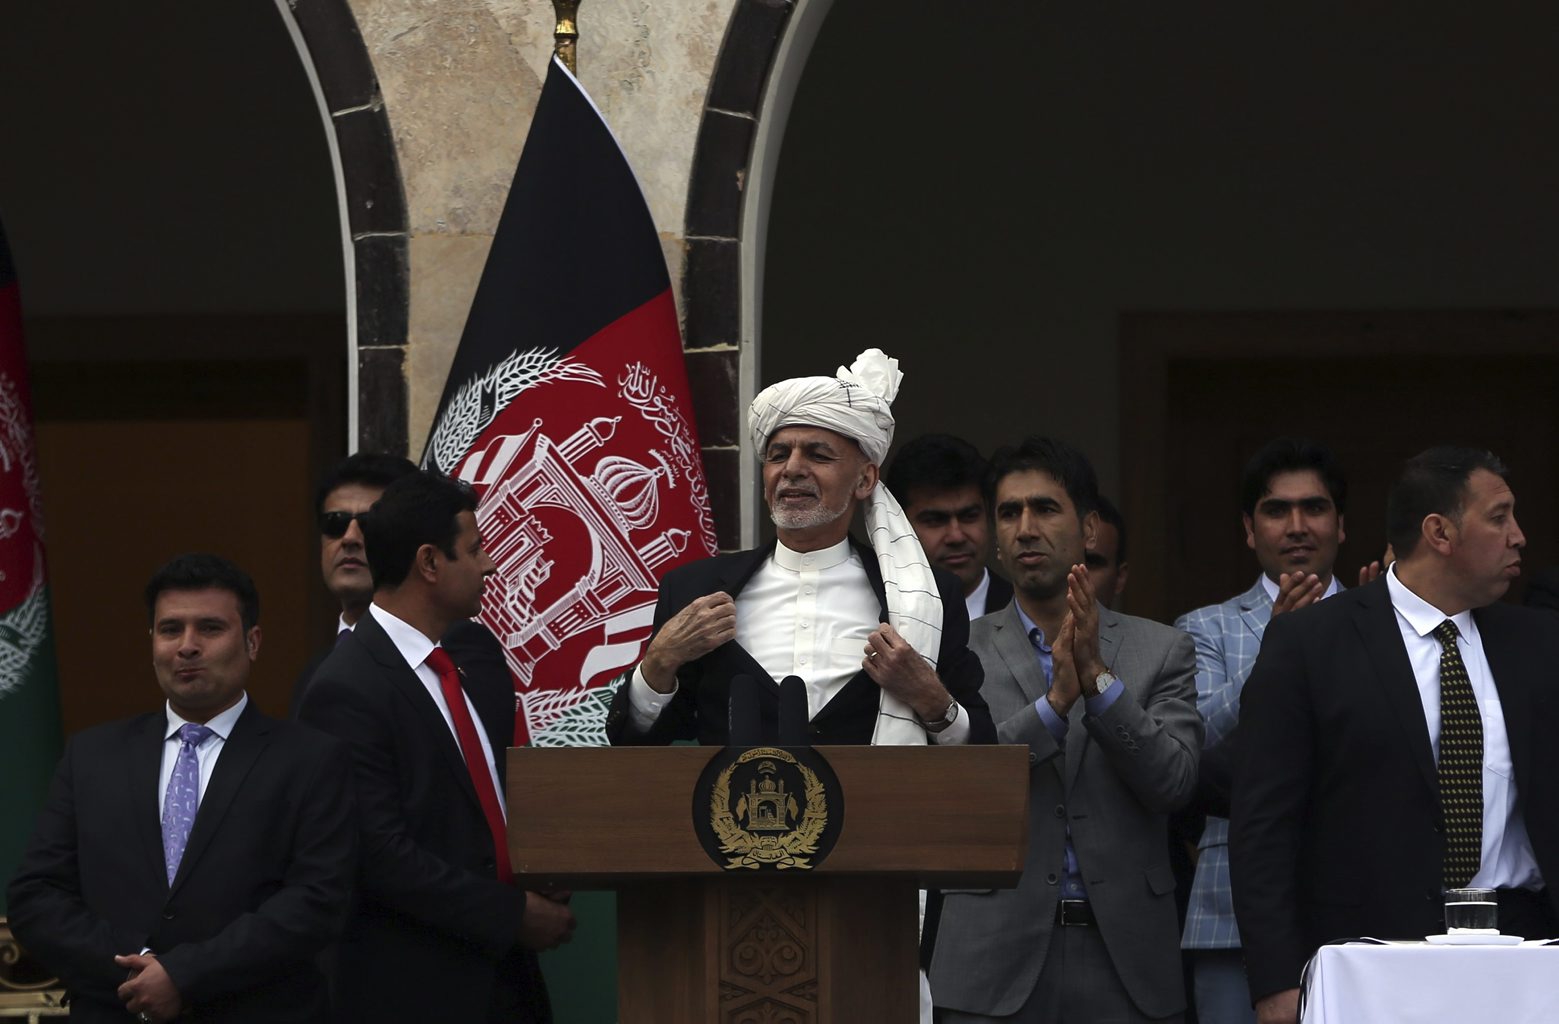 Afghan President Ashraf Ghani, center, opens his coat after a few rockets are fired during his speech after being sworn in at his inauguration ceremony at the presidential palace in Kabul, Afghanistan, Monday, March 9, 2020. (AP Photo/Rahmat Gul) Afghanistan